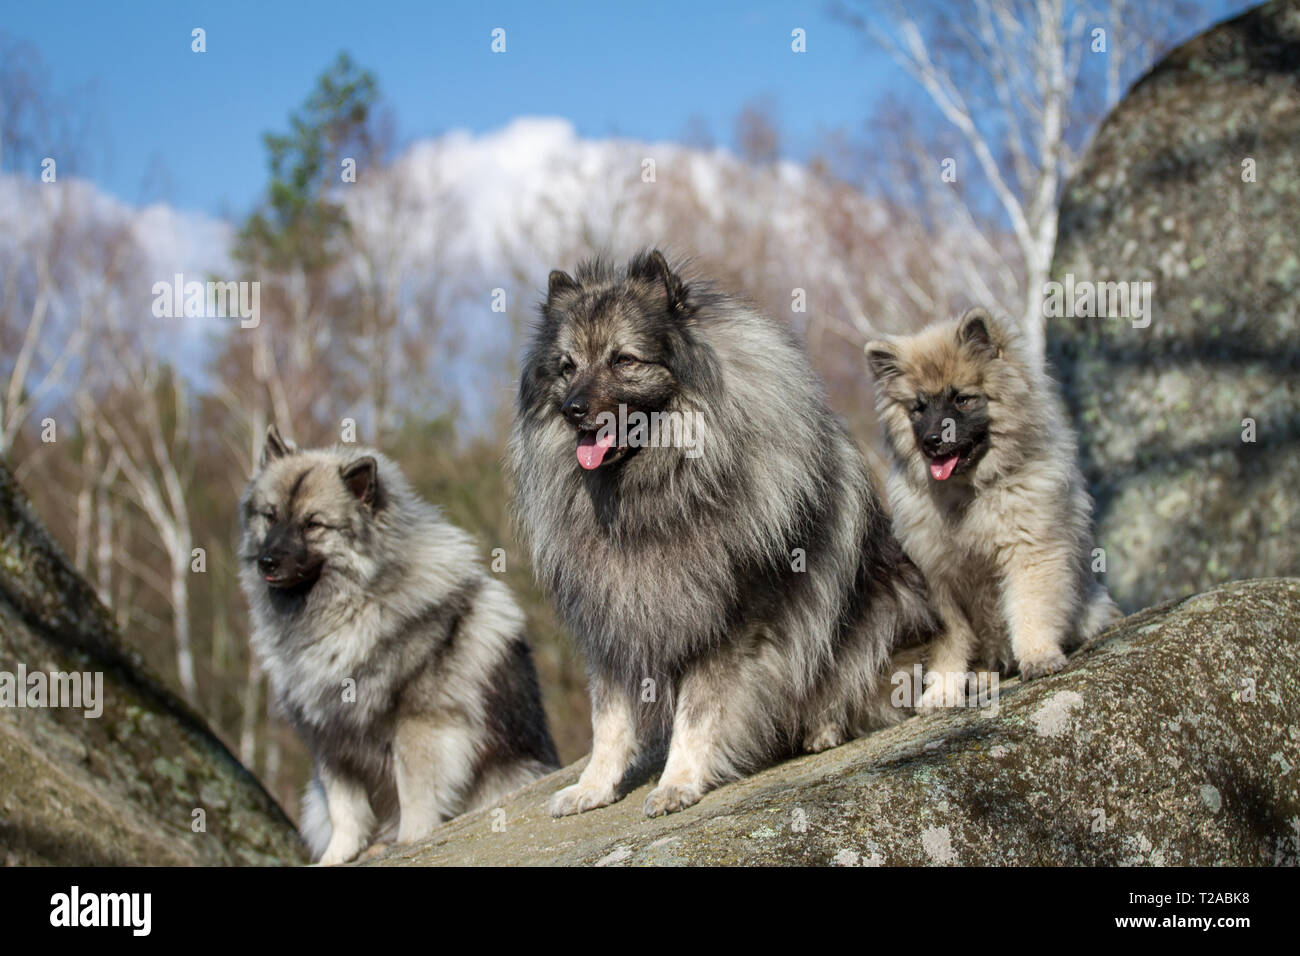 A group of 3 Wolfsspitz (Keeshond) dogs Stock Photo